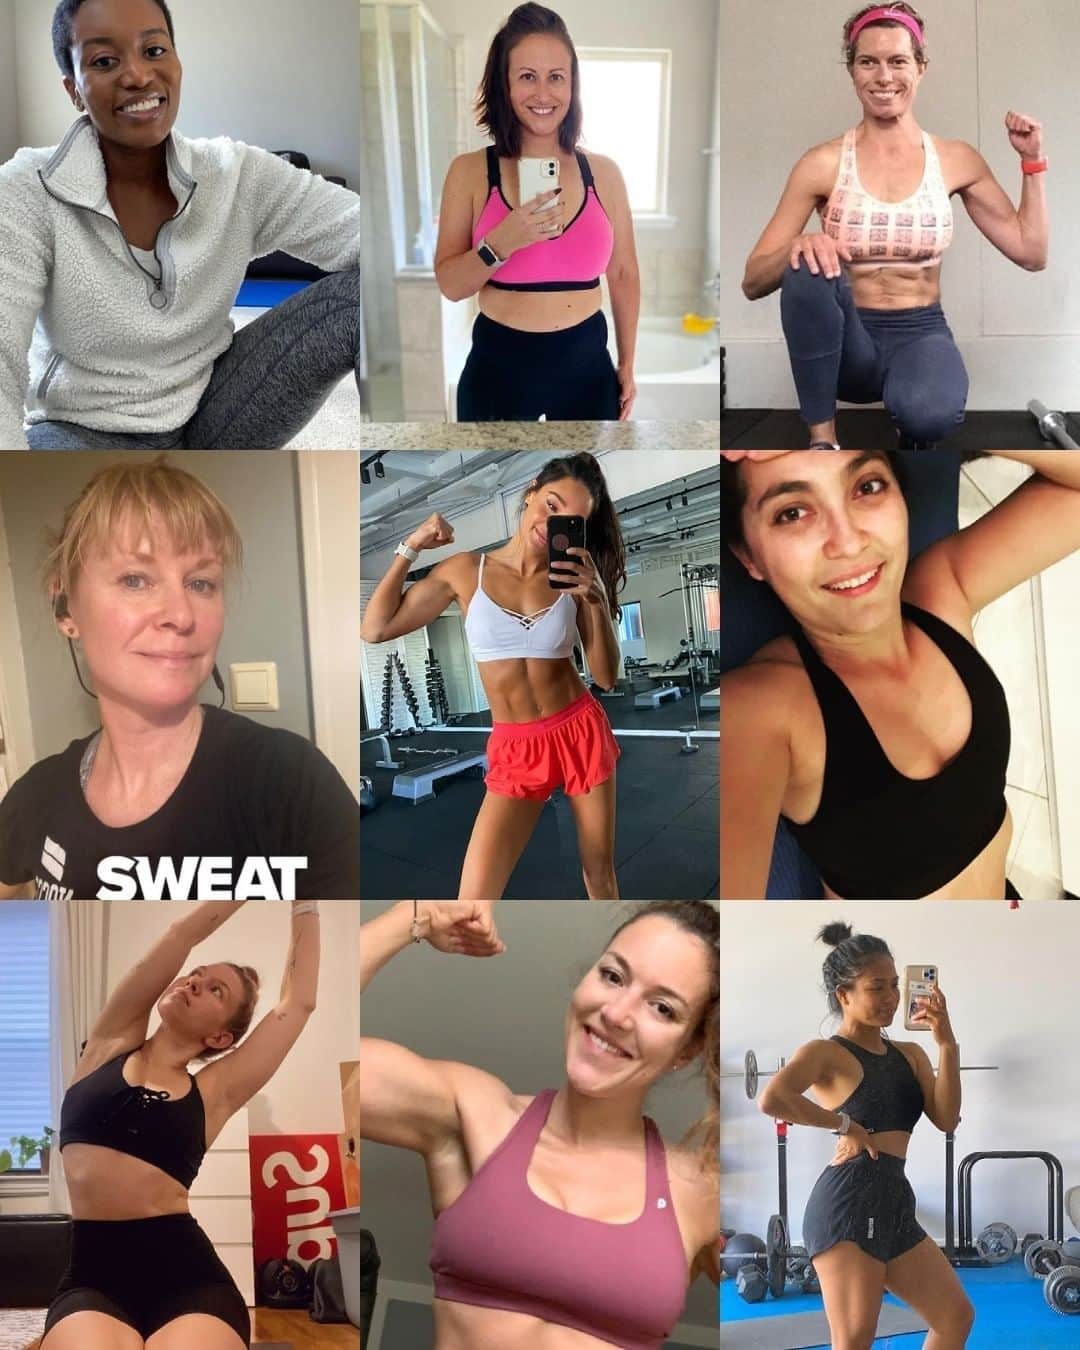 ケイラ・アイトサインズさんのインスタグラム写真 - (ケイラ・アイトサインズInstagram)「OMG! Registrations for the #SweatChallenge have been open for less than two weeks and OVER 49,000 WOMEN have already signed up! 👏👏👏 The fact that so many of us will be doing the challenge together makes me soooo excited! When you have the support of a community on your health and fitness journey, you can get WAY more out of the experience. That's what makes our Sweat Challenge so incredible. There will be literally thousands of women around the world cheering you on and keeping you motivated for the entire six weeks! This support can make your goals more achievable and the whole experience is so much fun.  Even though the world has been through so many ups and downs this year, I loved how the #SweatCommunity has stayed connected through health and fitness! It was amazing to watch you all supporting one another and bringing positivity into each other's lives. 💪  I absolutely loved seeing these photos of women coming together and working out, whether it was in person or online! I know you ladies are going to bring the same great vibes and positivity into this challenge. 🙌  This challenge is going to be our biggest and best yet, with SO many options for you to choose from. We know everyone has different preferences when it comes to their training, so we have made our programs as customisable as possible. You can choose zero-equipment options and work out from the comfort of your own home, or choose equipment options if you love going to the gym and are able to access one. We have options for beginners or women returning to their training after a break, as well as options for the ladies who are advanced or wanting to really challenge themselves!   The six-week Sweat Challenge is starting on January 11, 2021, but you can register NOW on @Sweat. Join me and the #SweatCommunity and start 2021 off RIGHT. 😁  www.kaylaitsines.com/SweatChallenge  #BBGcommunity: @sophonthemove @jo.ie.anne @fitwithsweat @sweat_for_yourself @momentswith.monica @seattle_squats @sweat.porter @leah.maio」12月3日 7時30分 - kayla_itsines